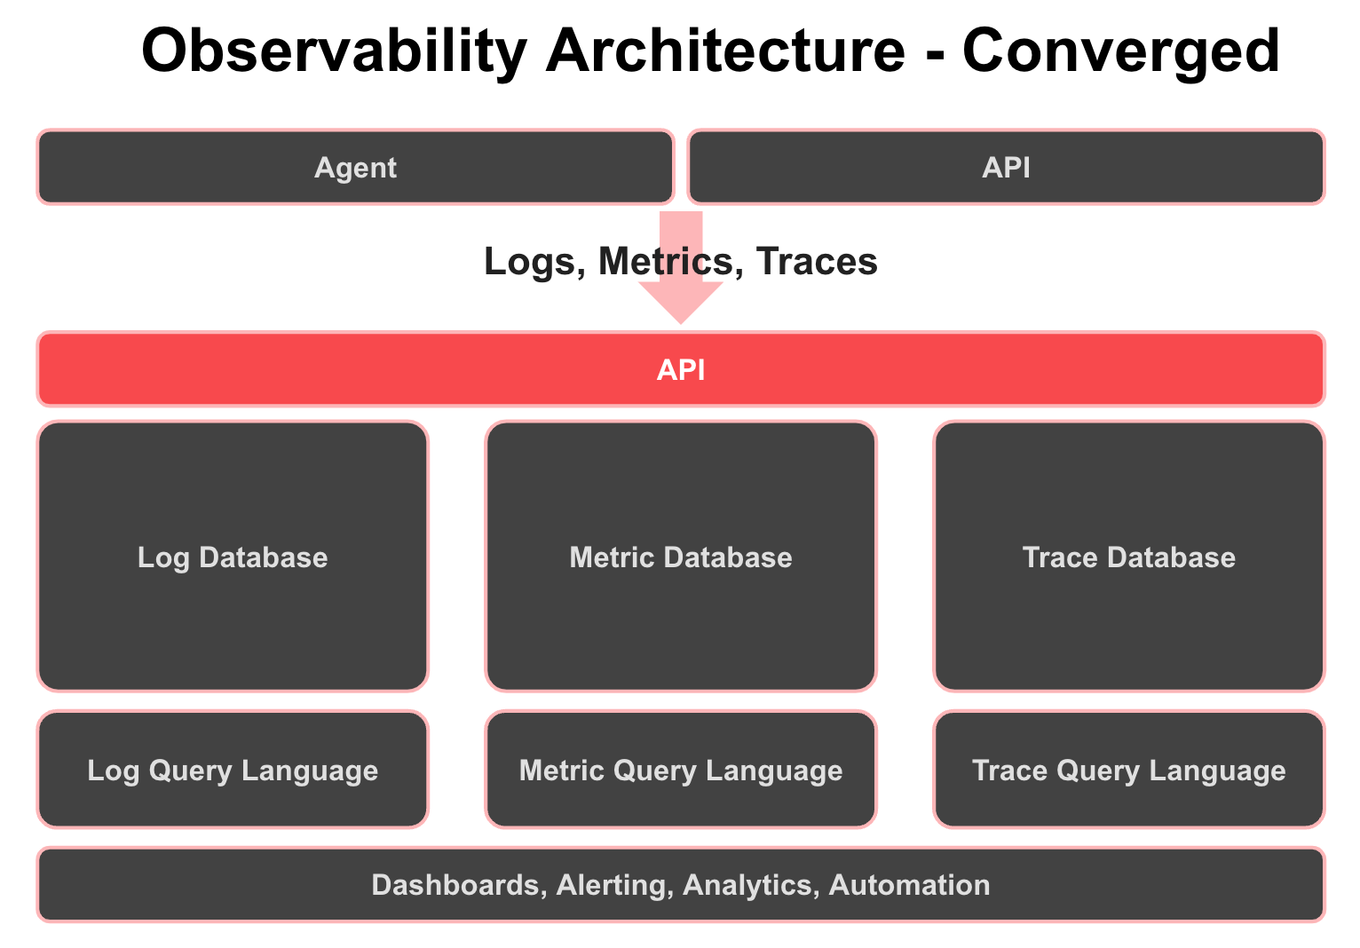 Observability Architecture - convereged